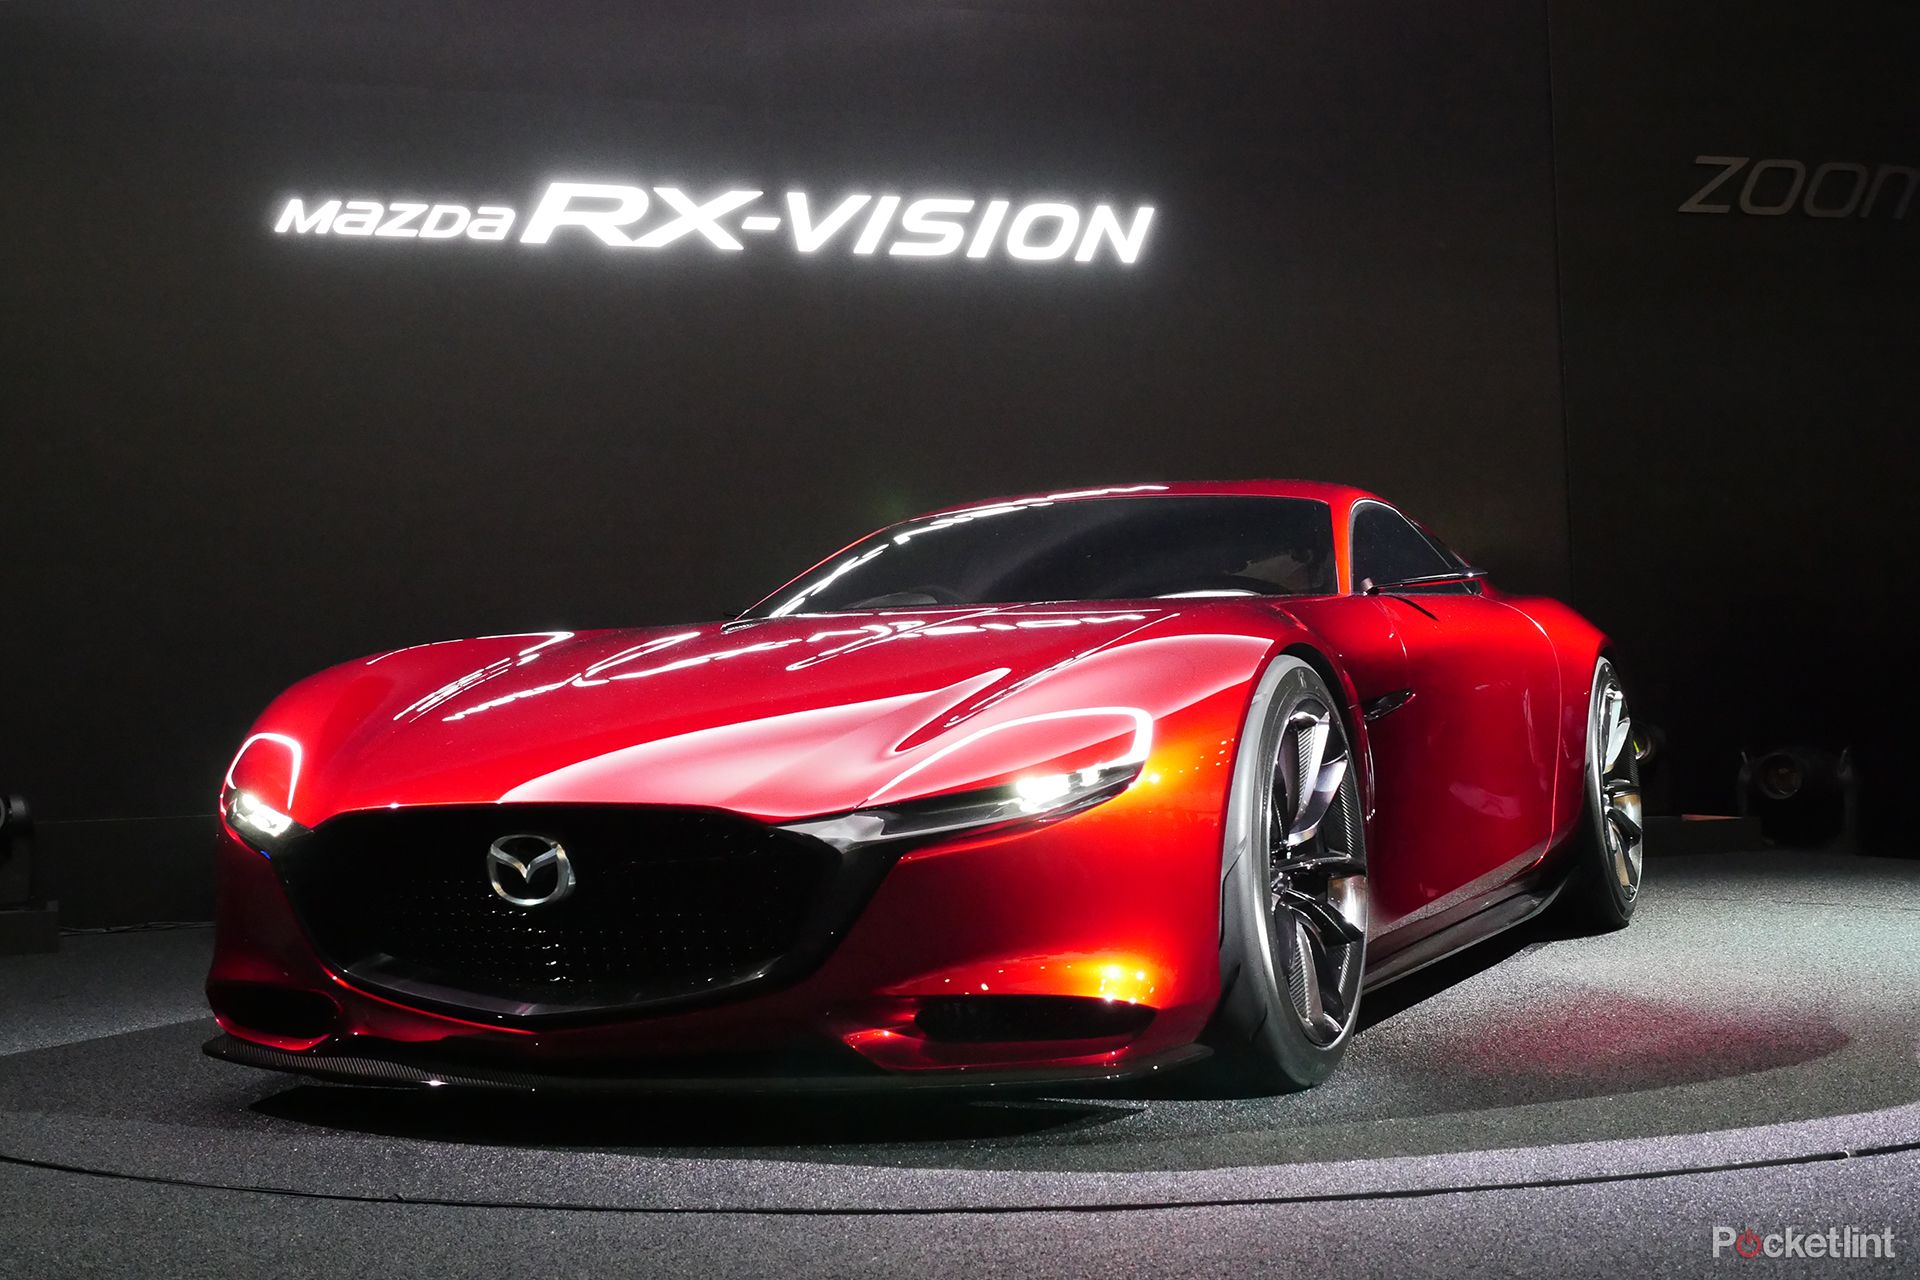 tokyo auto show 2015 in pictures crazy concepts futuristic supercars and more from the show floor image 1